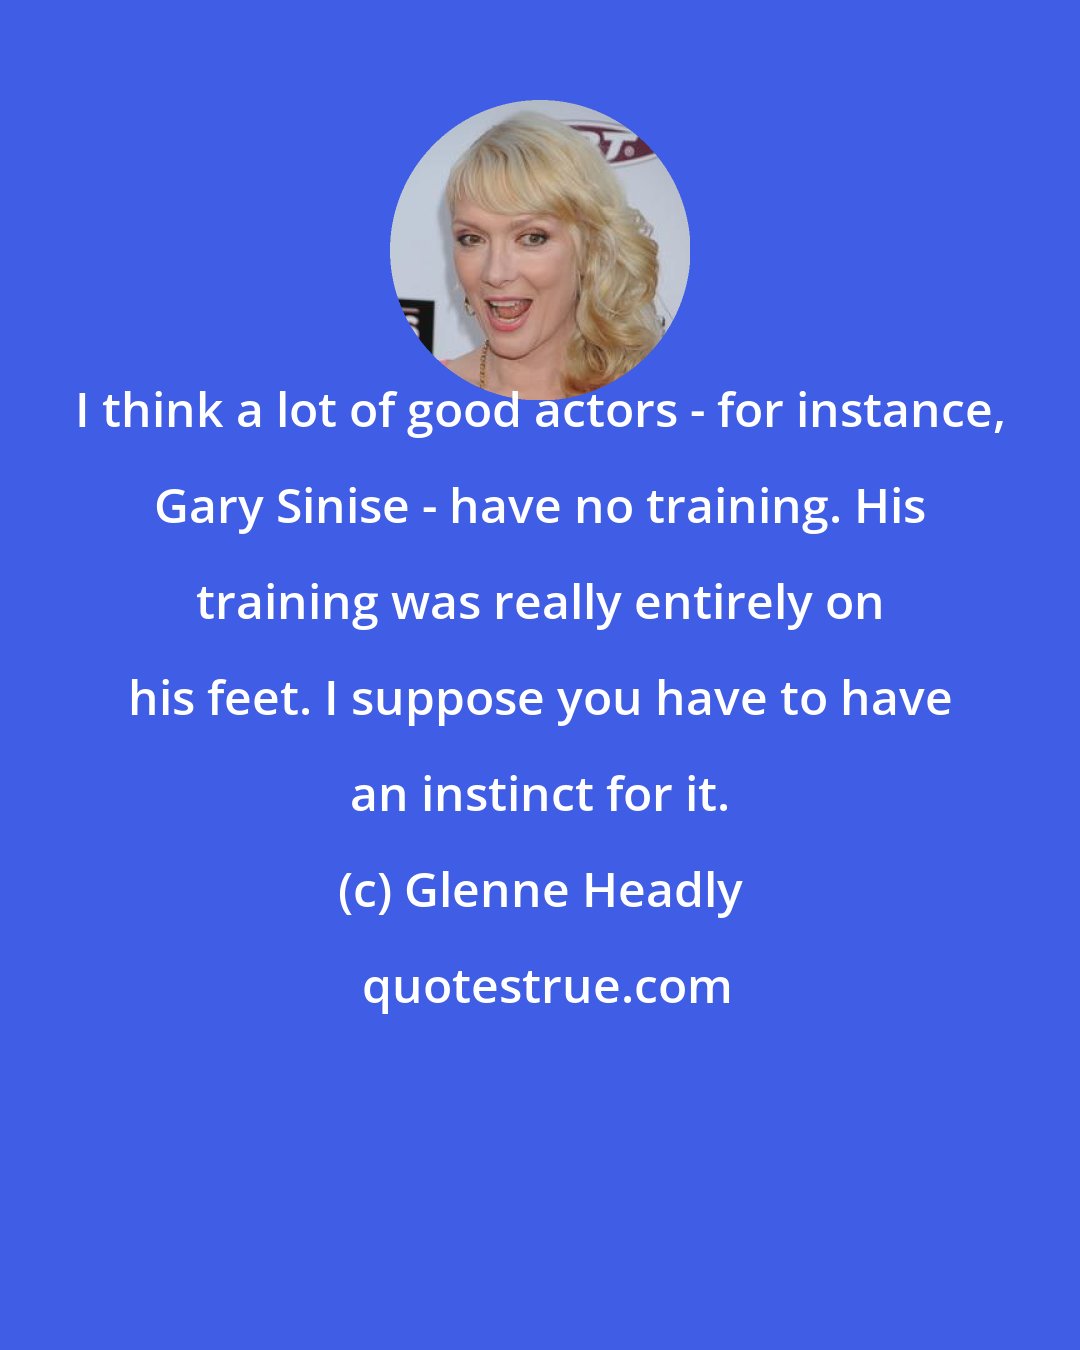 Glenne Headly: I think a lot of good actors - for instance, Gary Sinise - have no training. His training was really entirely on his feet. I suppose you have to have an instinct for it.